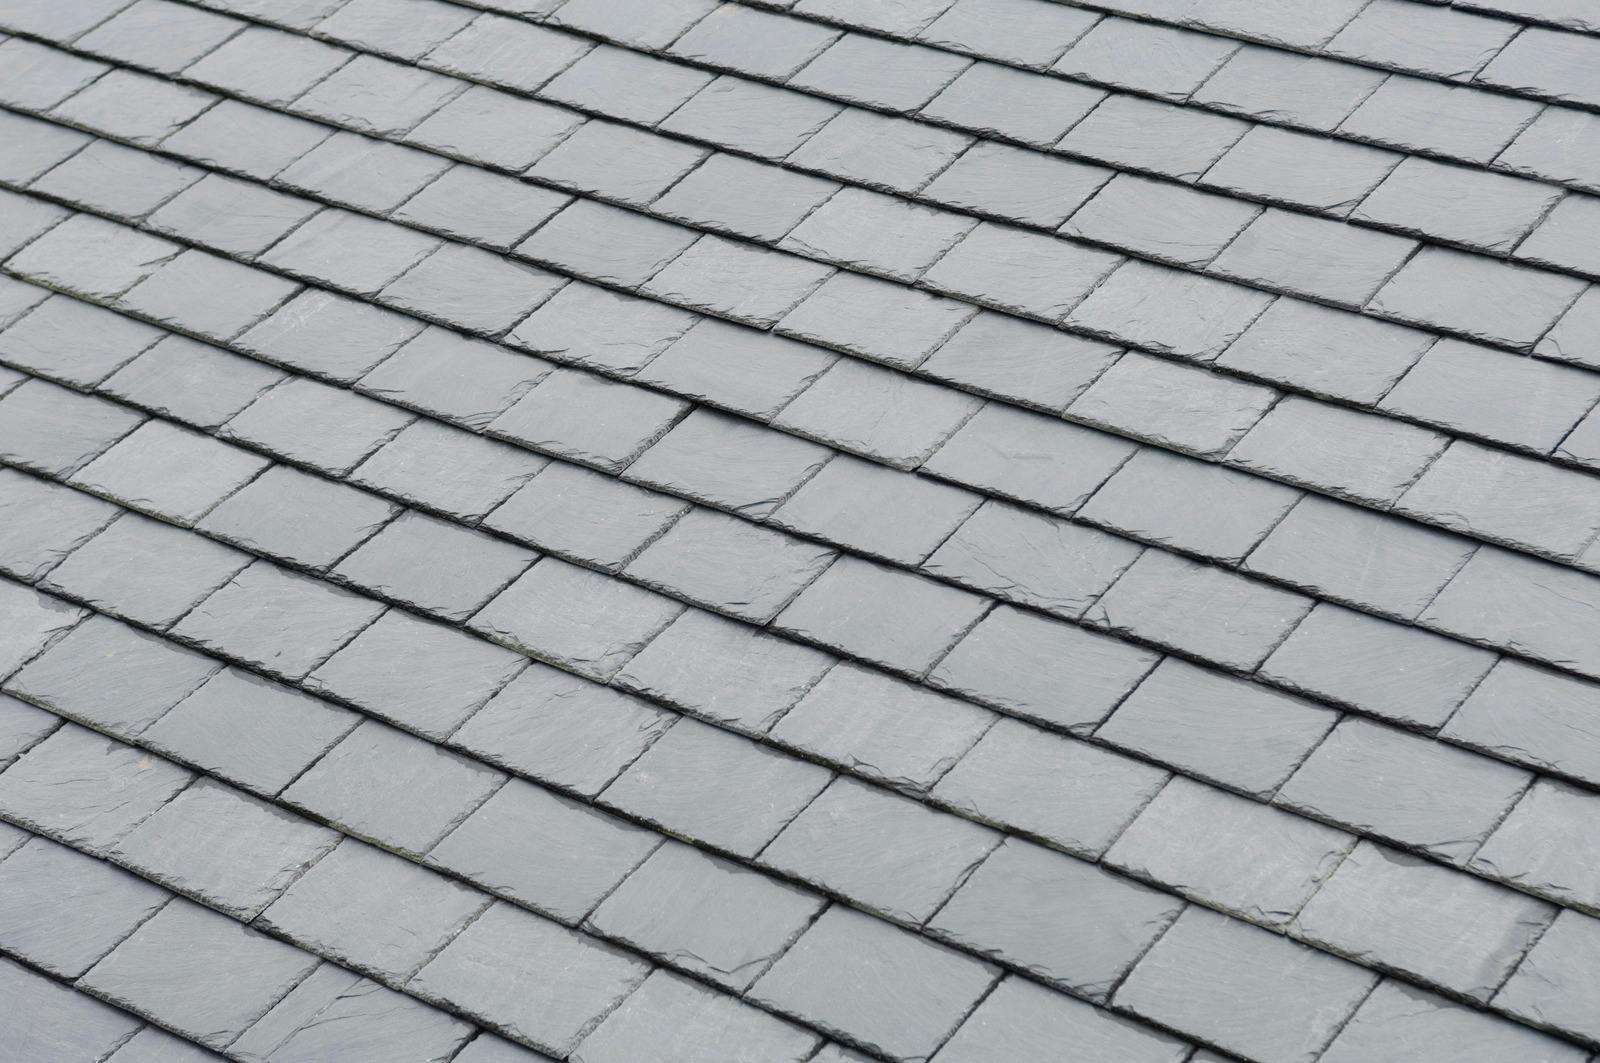 Re-roofing services Derbyshire, South Yorkshire and Nottinghamshire